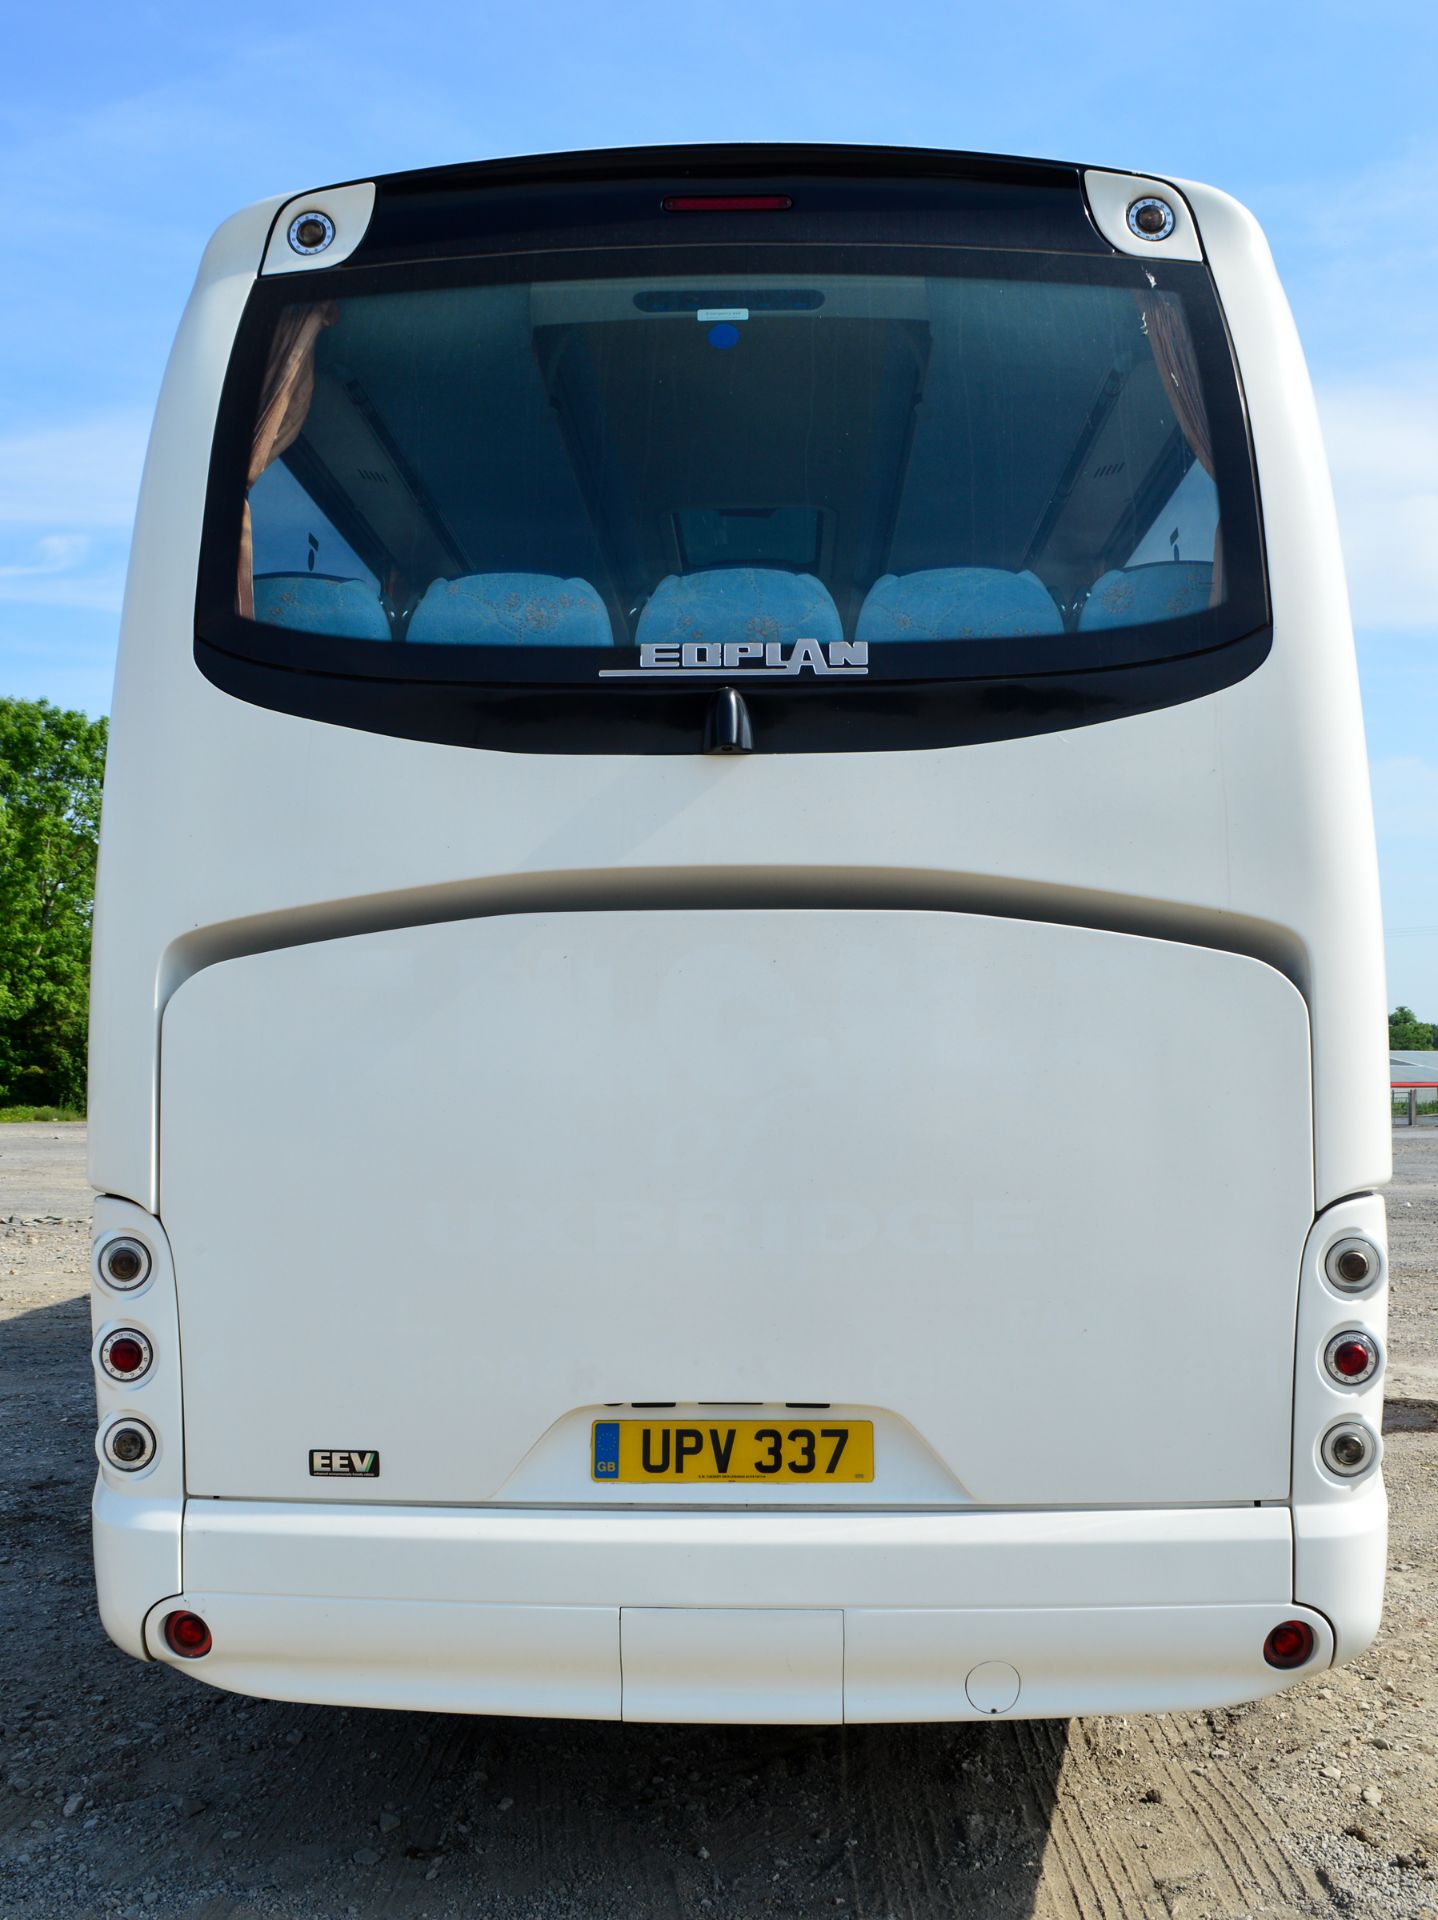 Neoplan Tourliner 49 seat luxury coach Registration Number: MJ11 KVG (UPV 337 has been retained) - Image 6 of 11